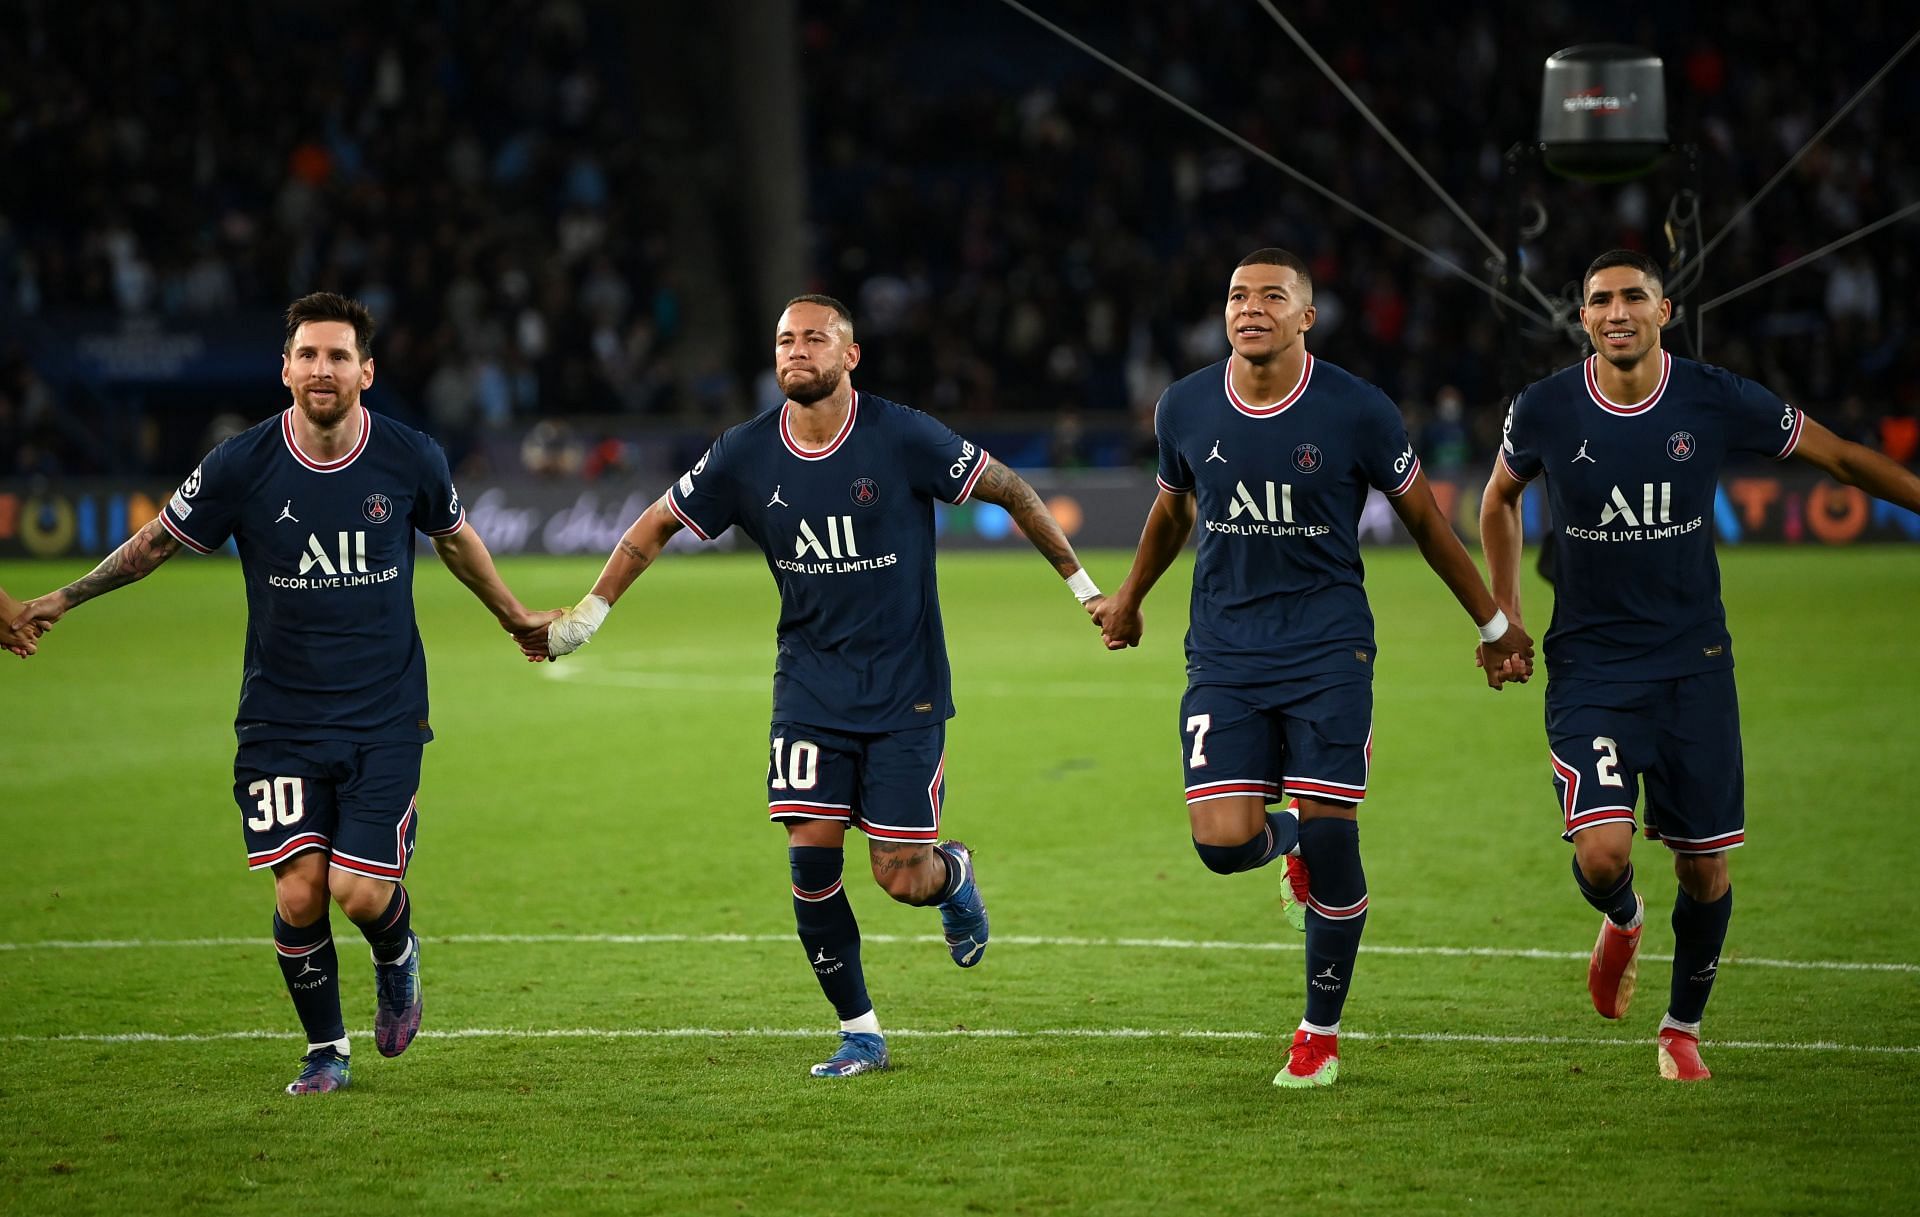 Paris Saint-Germain are one of the most valuable clubs in the world.